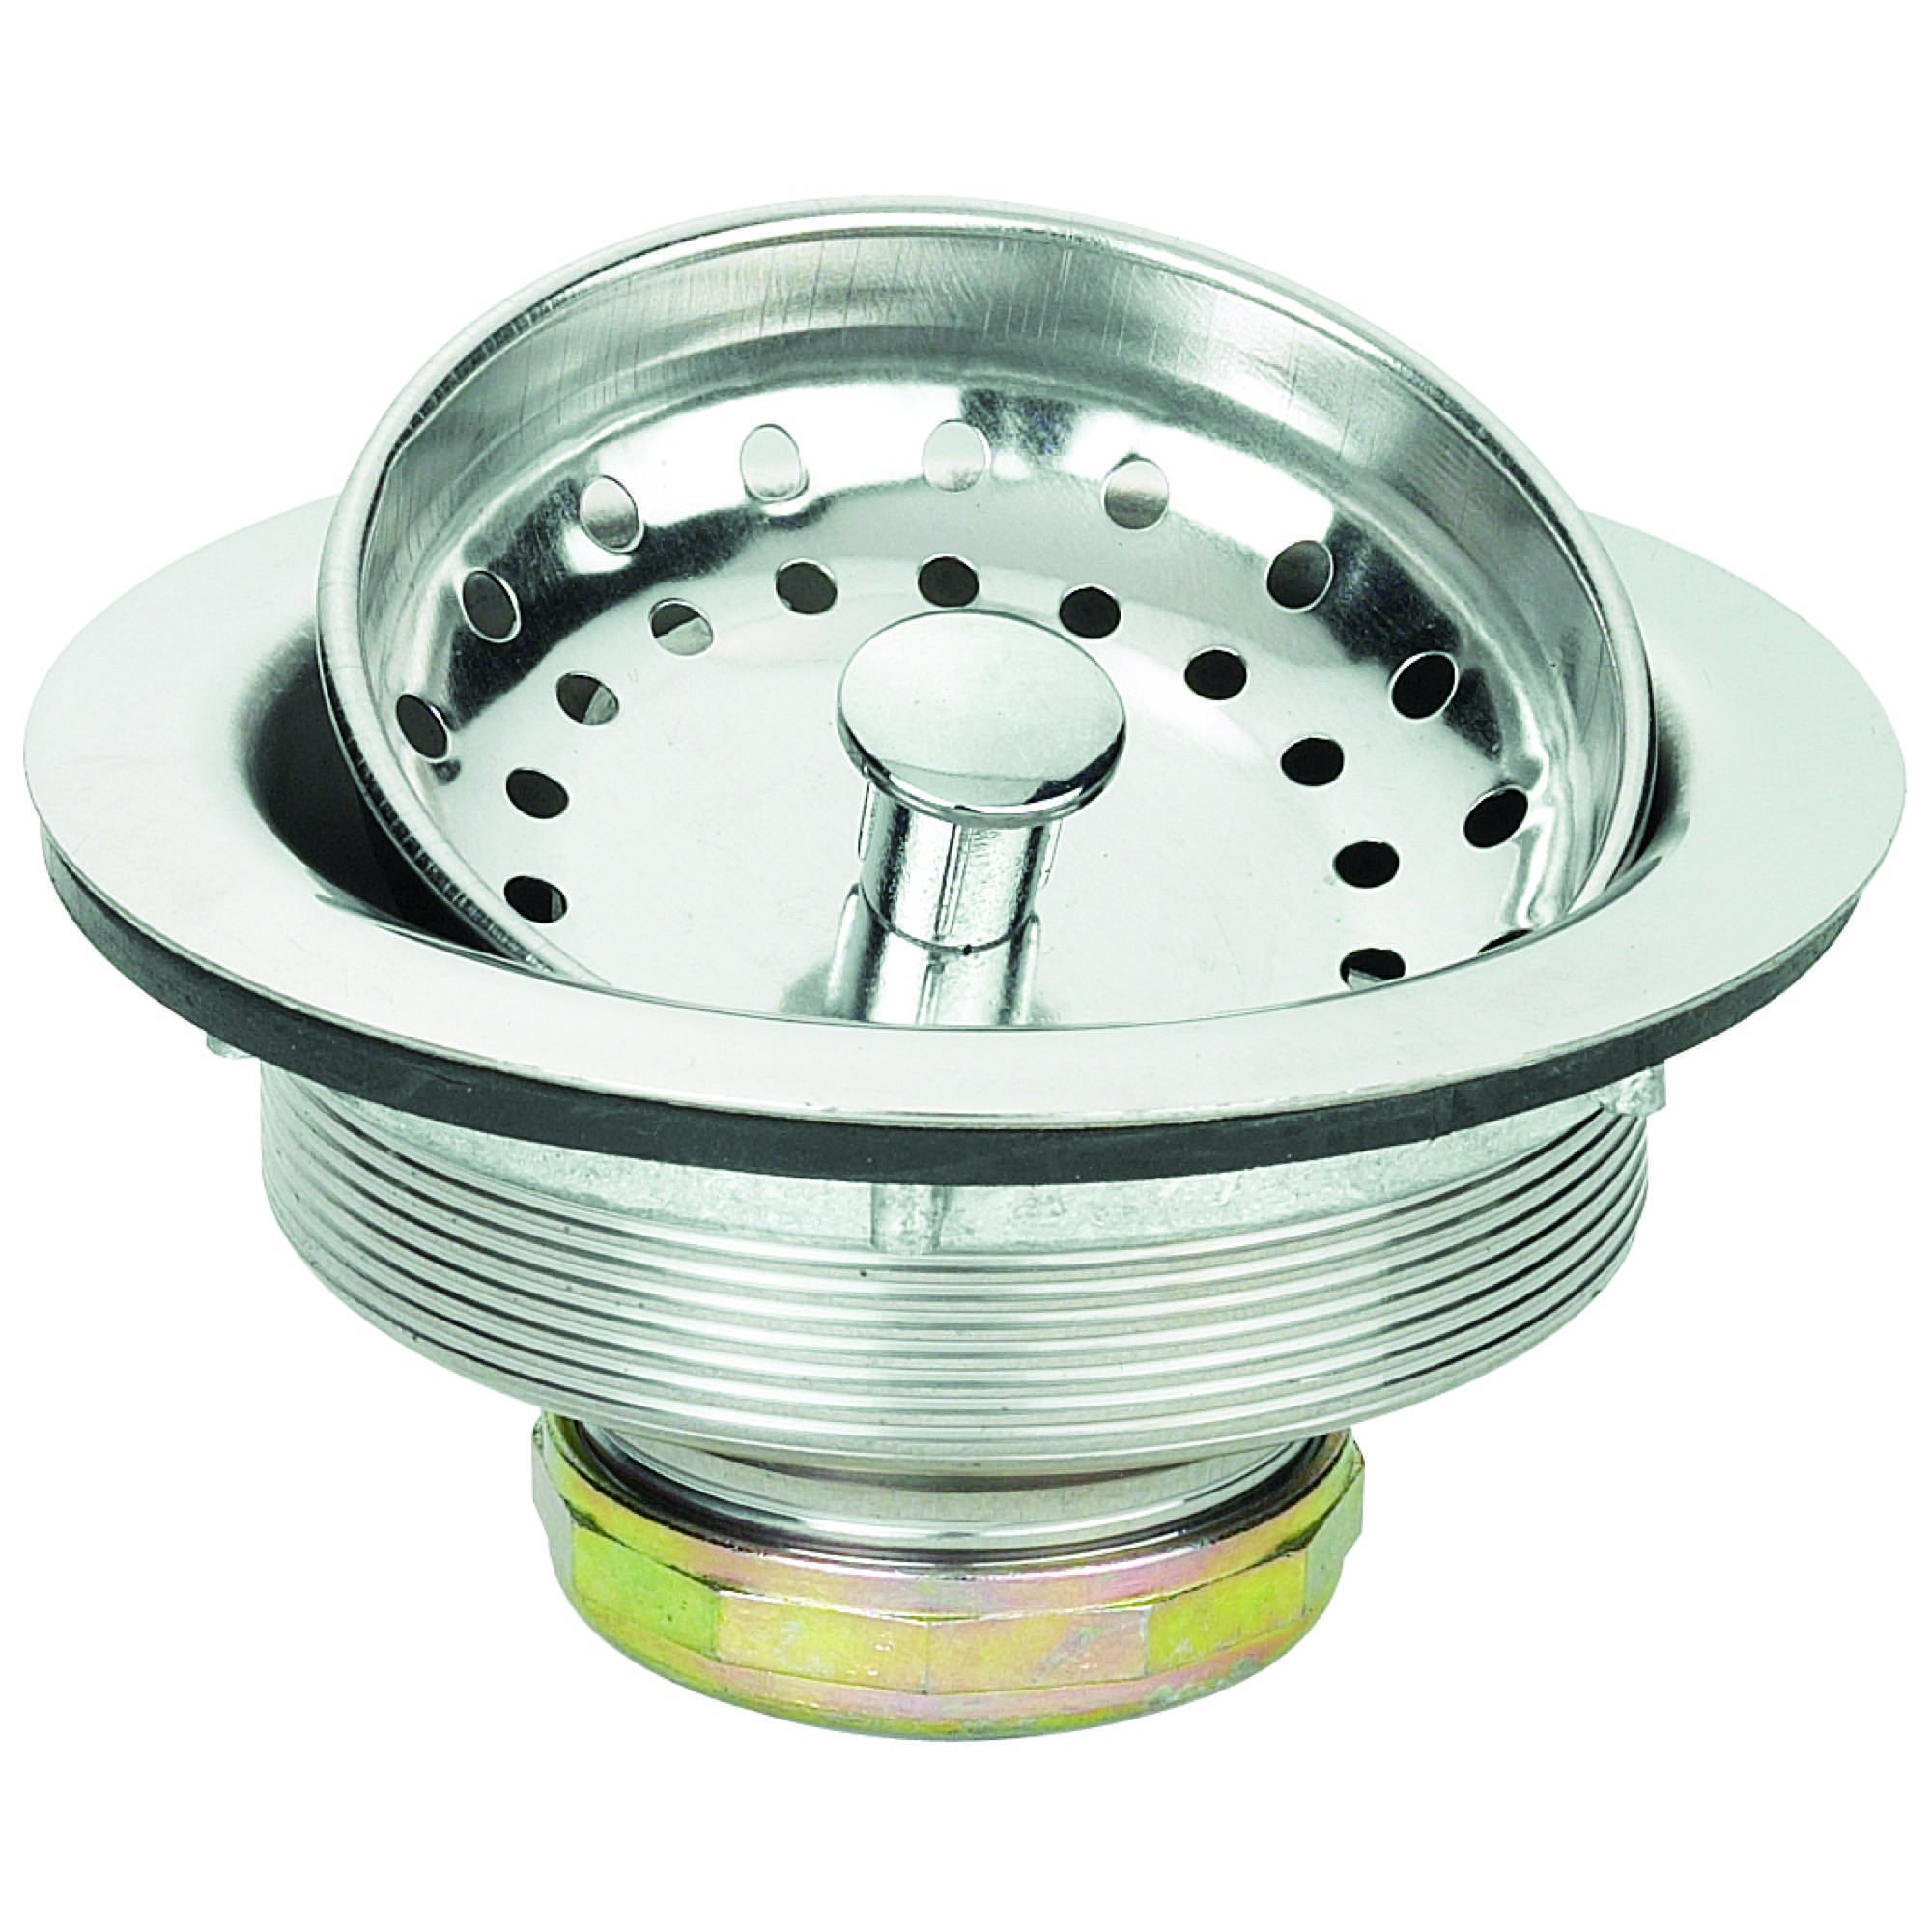 Master Equipment Stainless Steel Tub Strainers - Effective Strainers Designed to Prevent Pet Hair from Entering Drains in Grooming Tubs